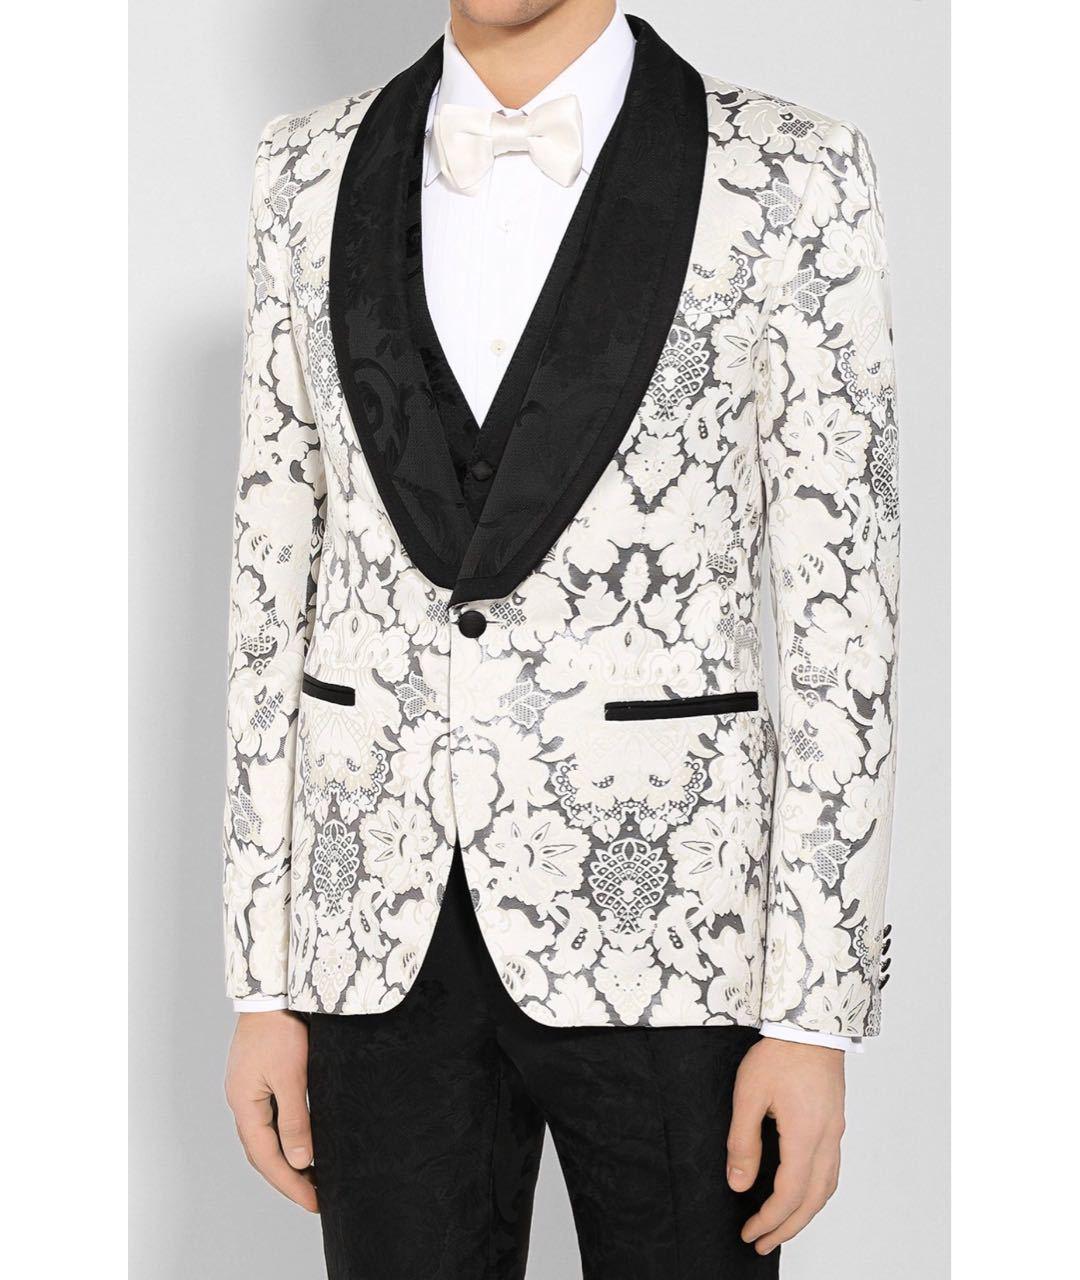 dolce and gabbana jacquard suit